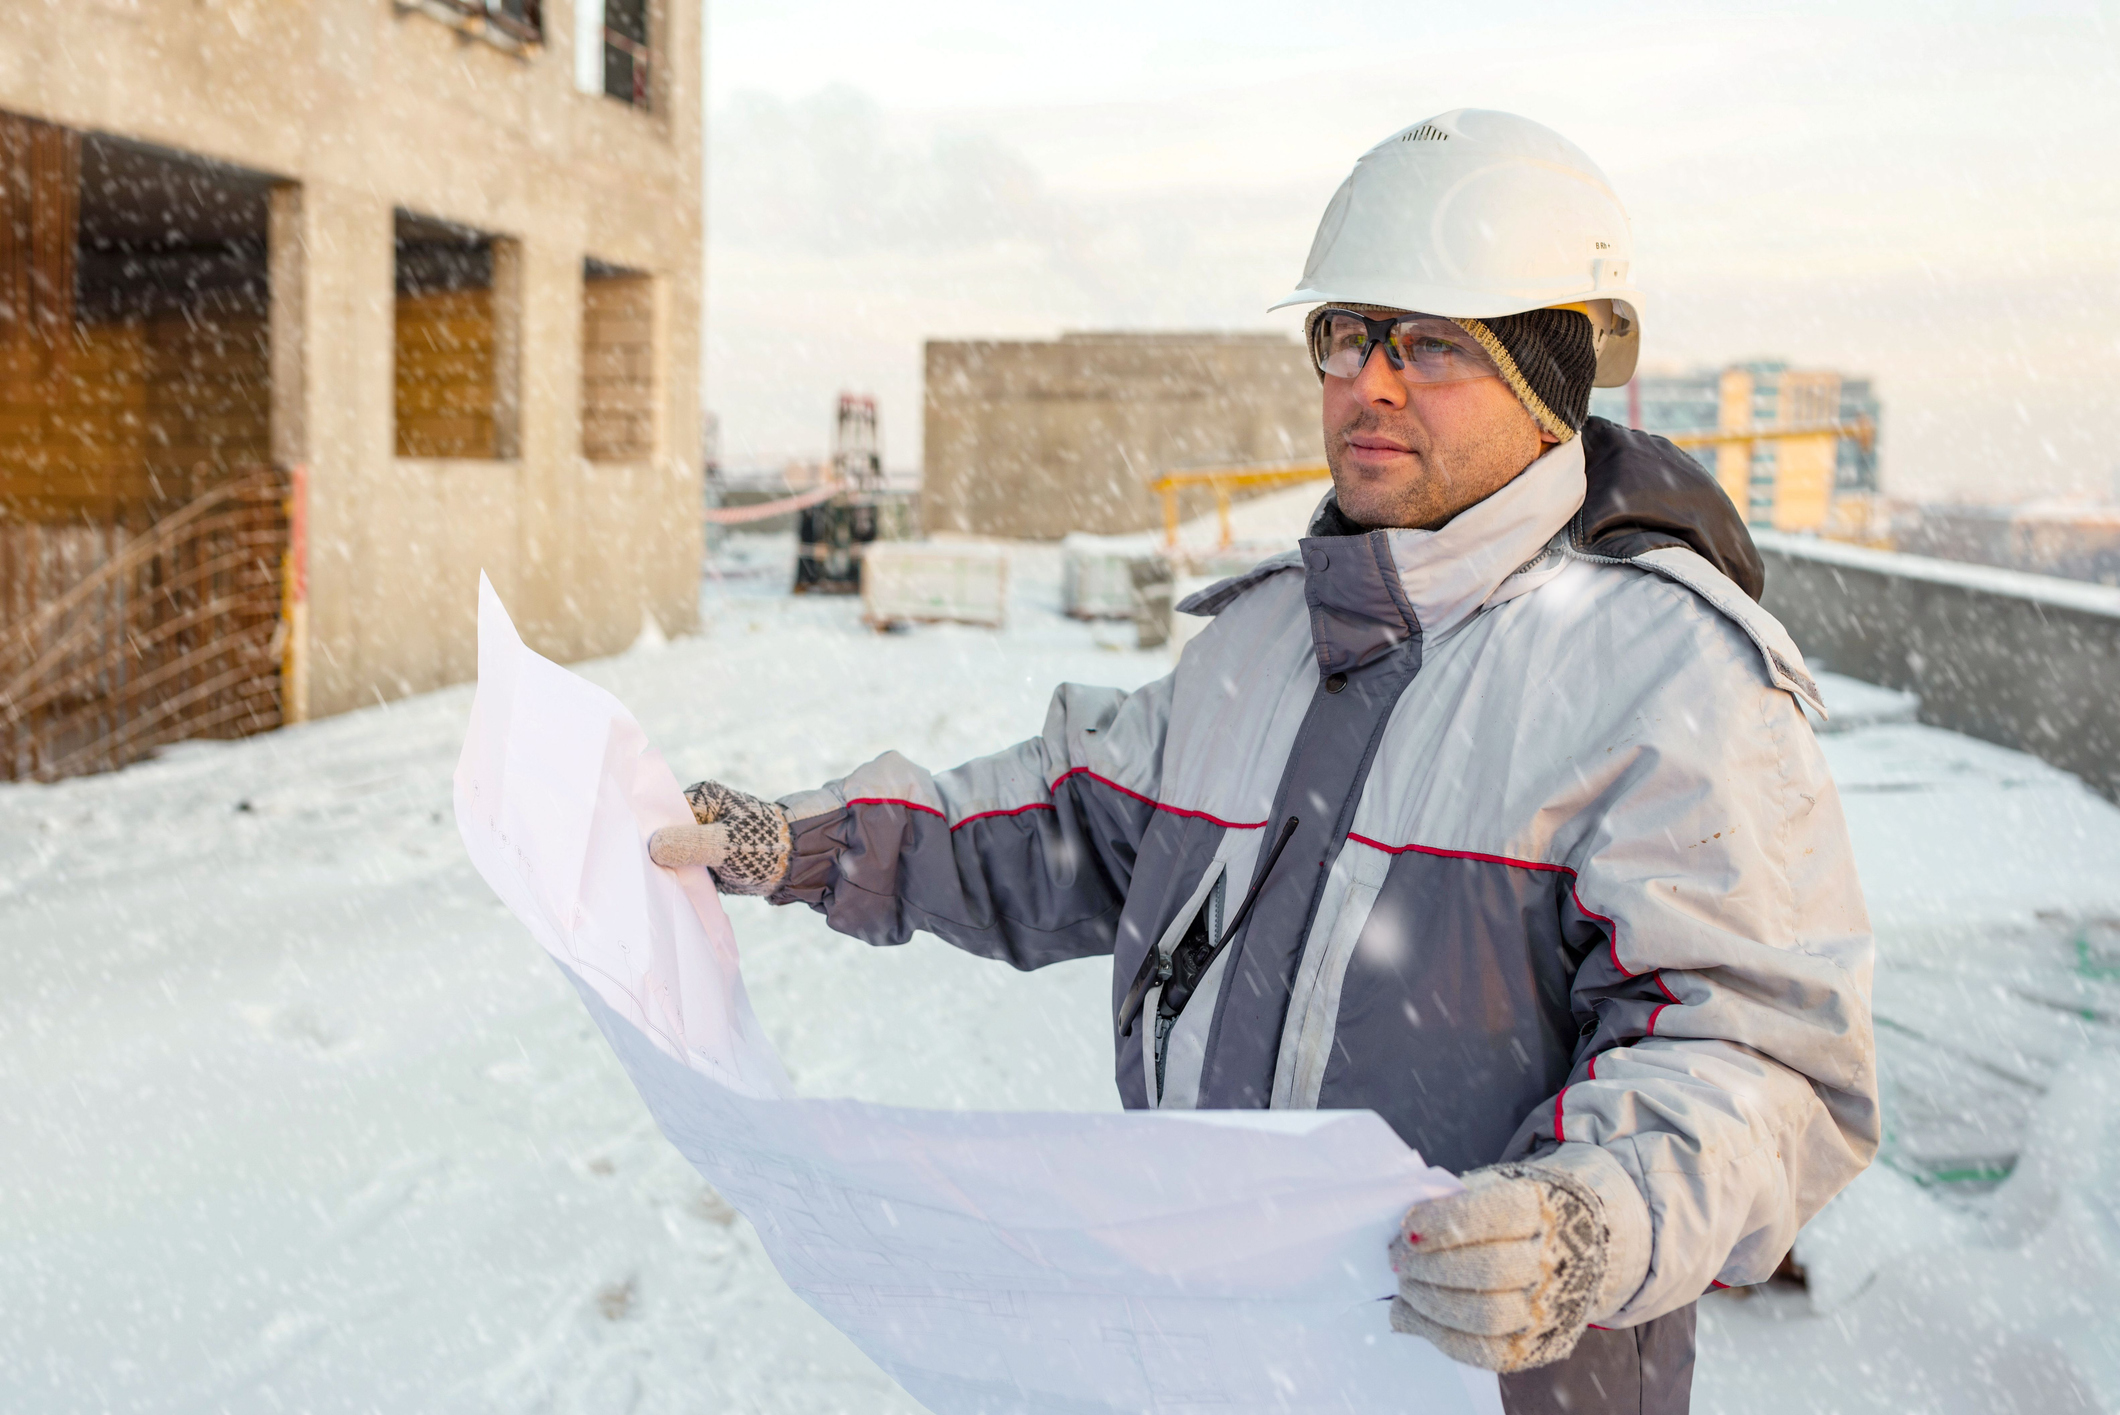 A civil engineer is holding up blueprints while in snowy weather, determining how they'd want to use their concrete admixtures.